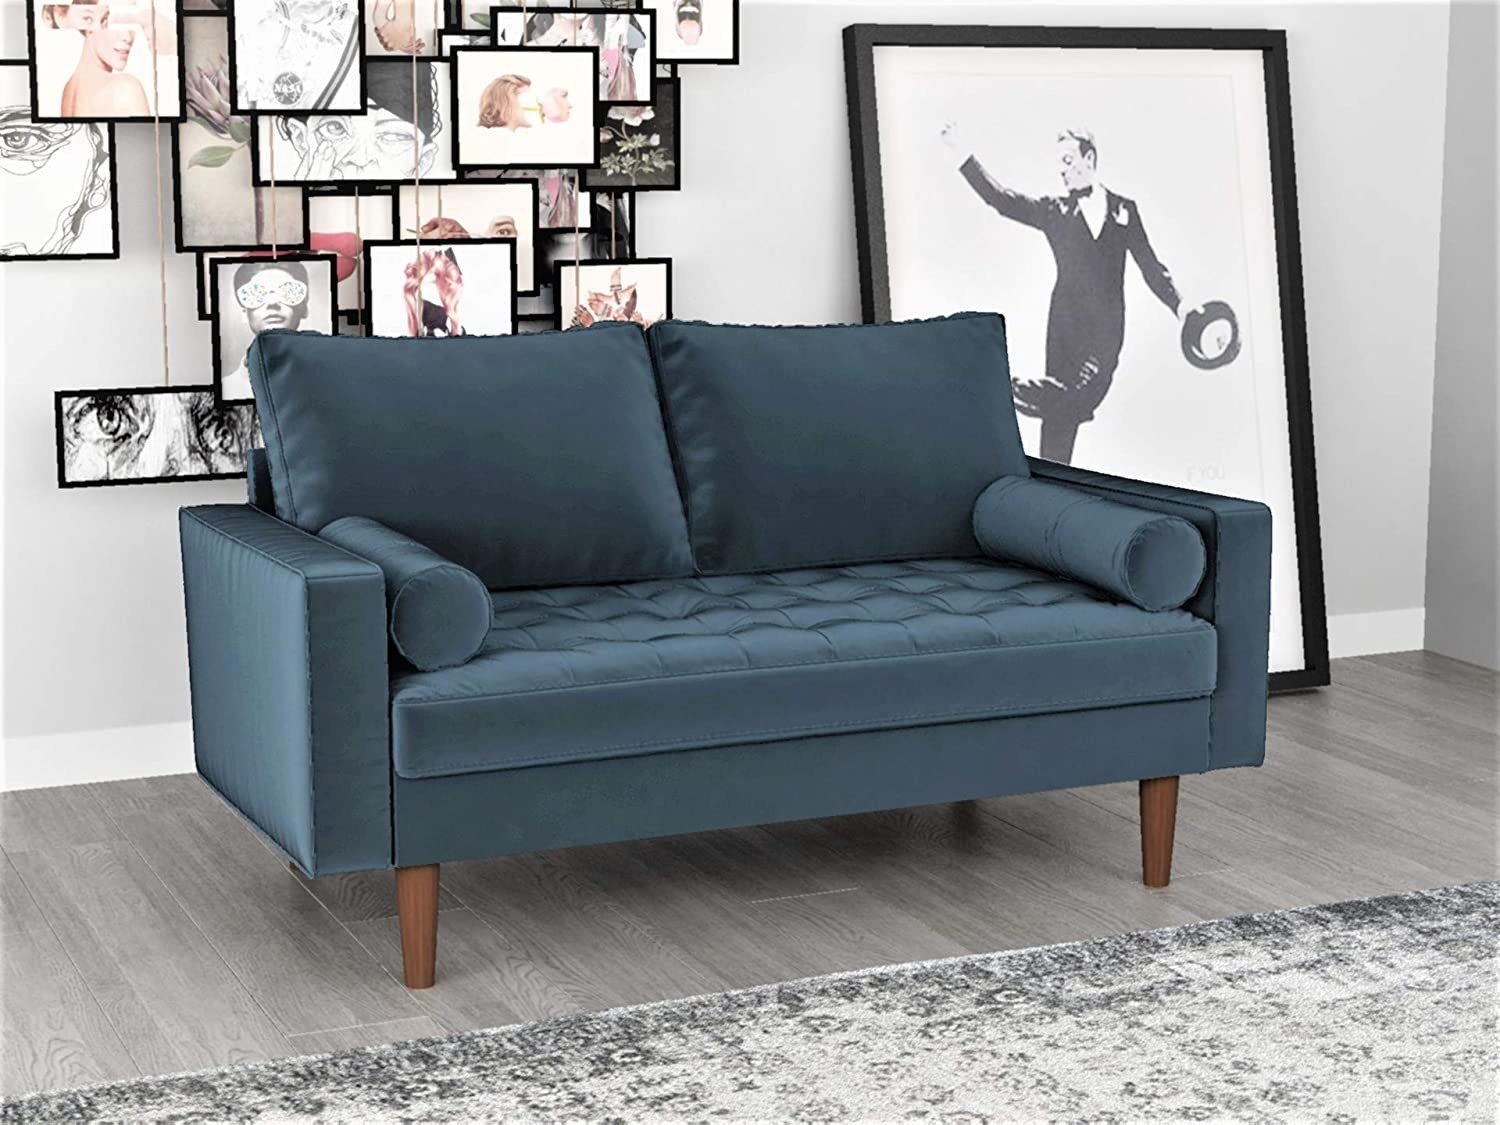 Blue love seat with tufted cushions 